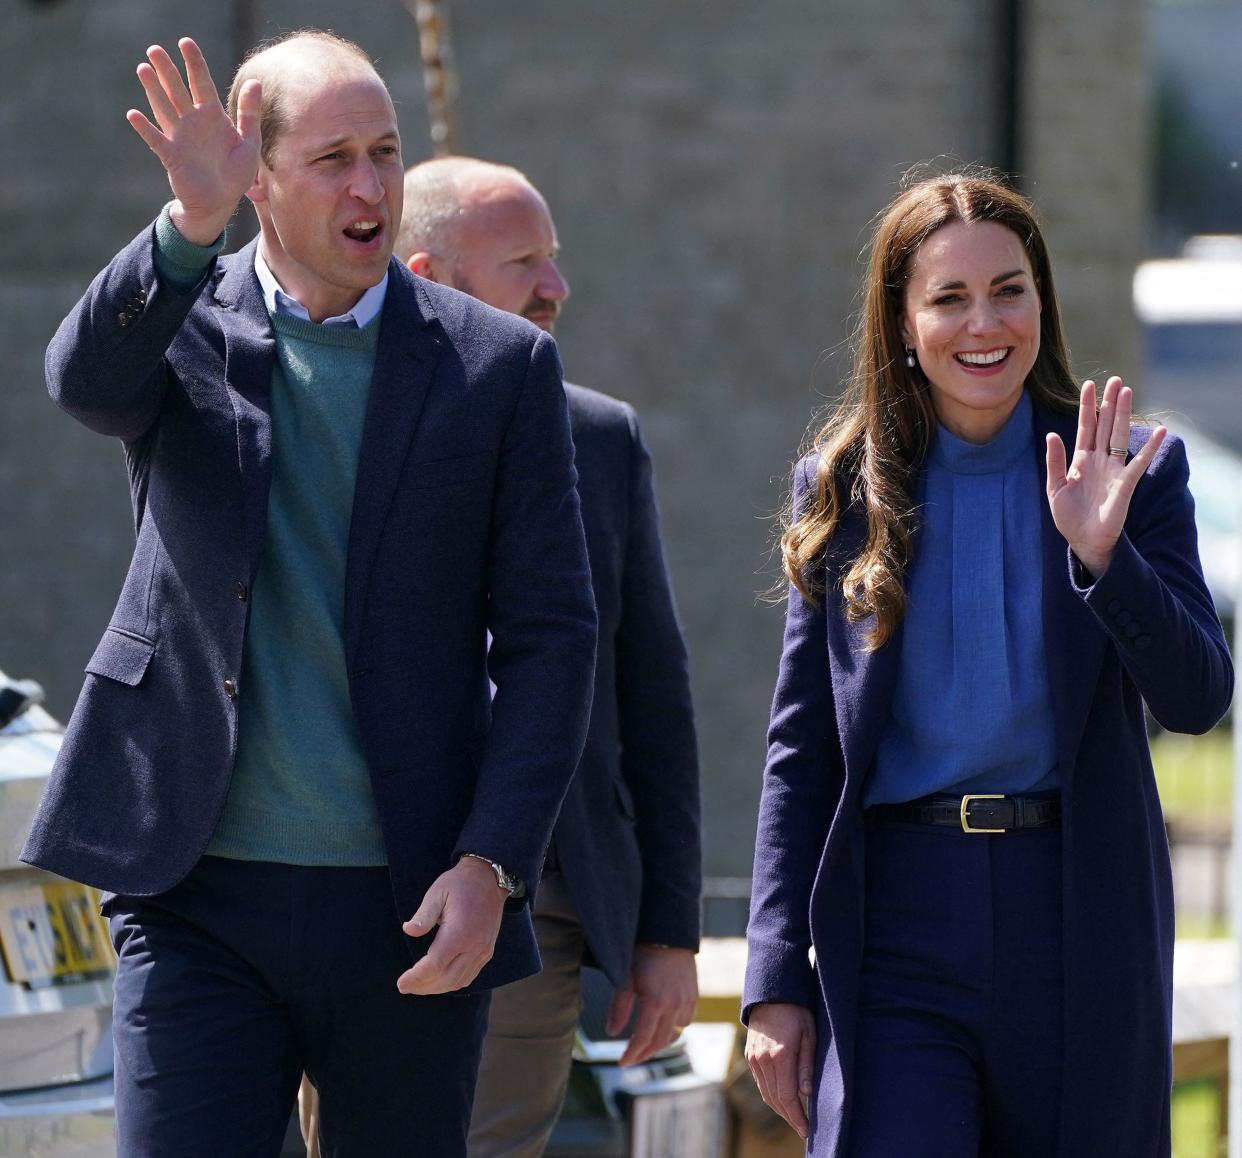 The royal couple, photographed in Scotland this week, have been focussed on mental health this week